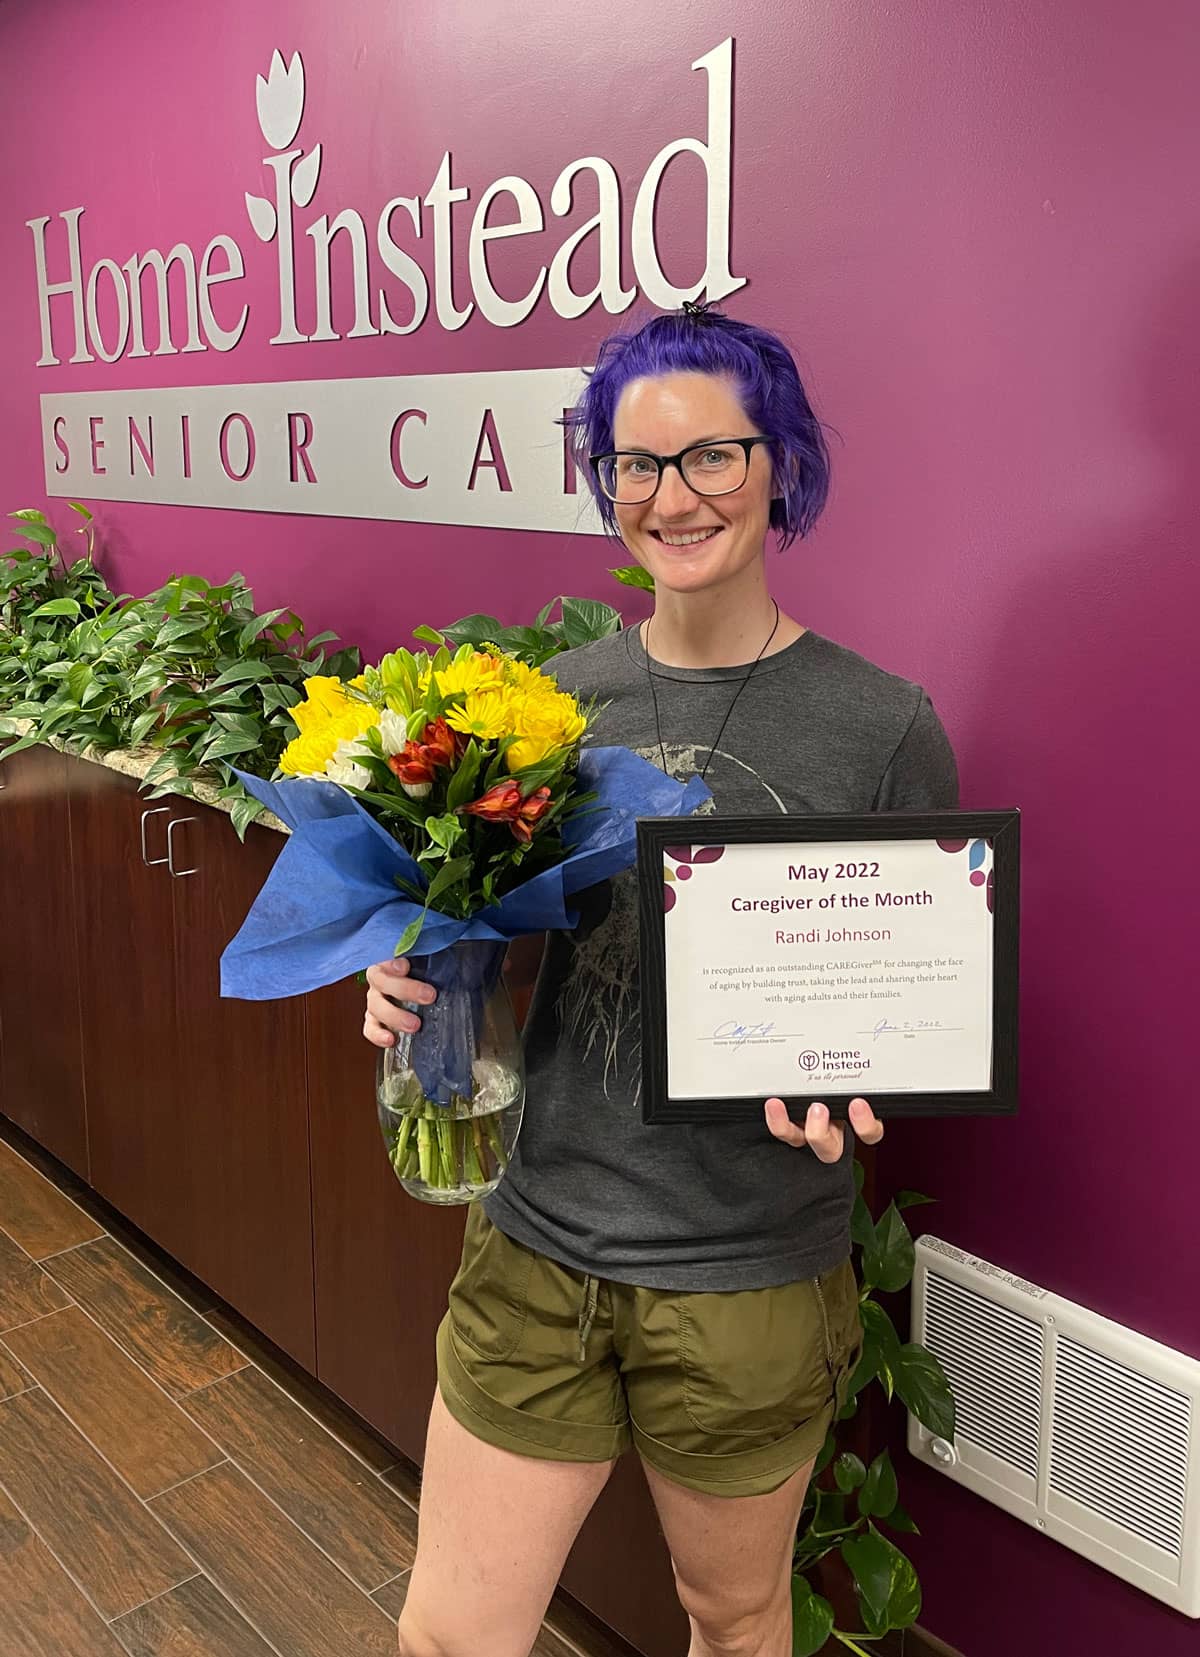 Randi J; Home Instead Denver May 2022 Care Professional of the Month